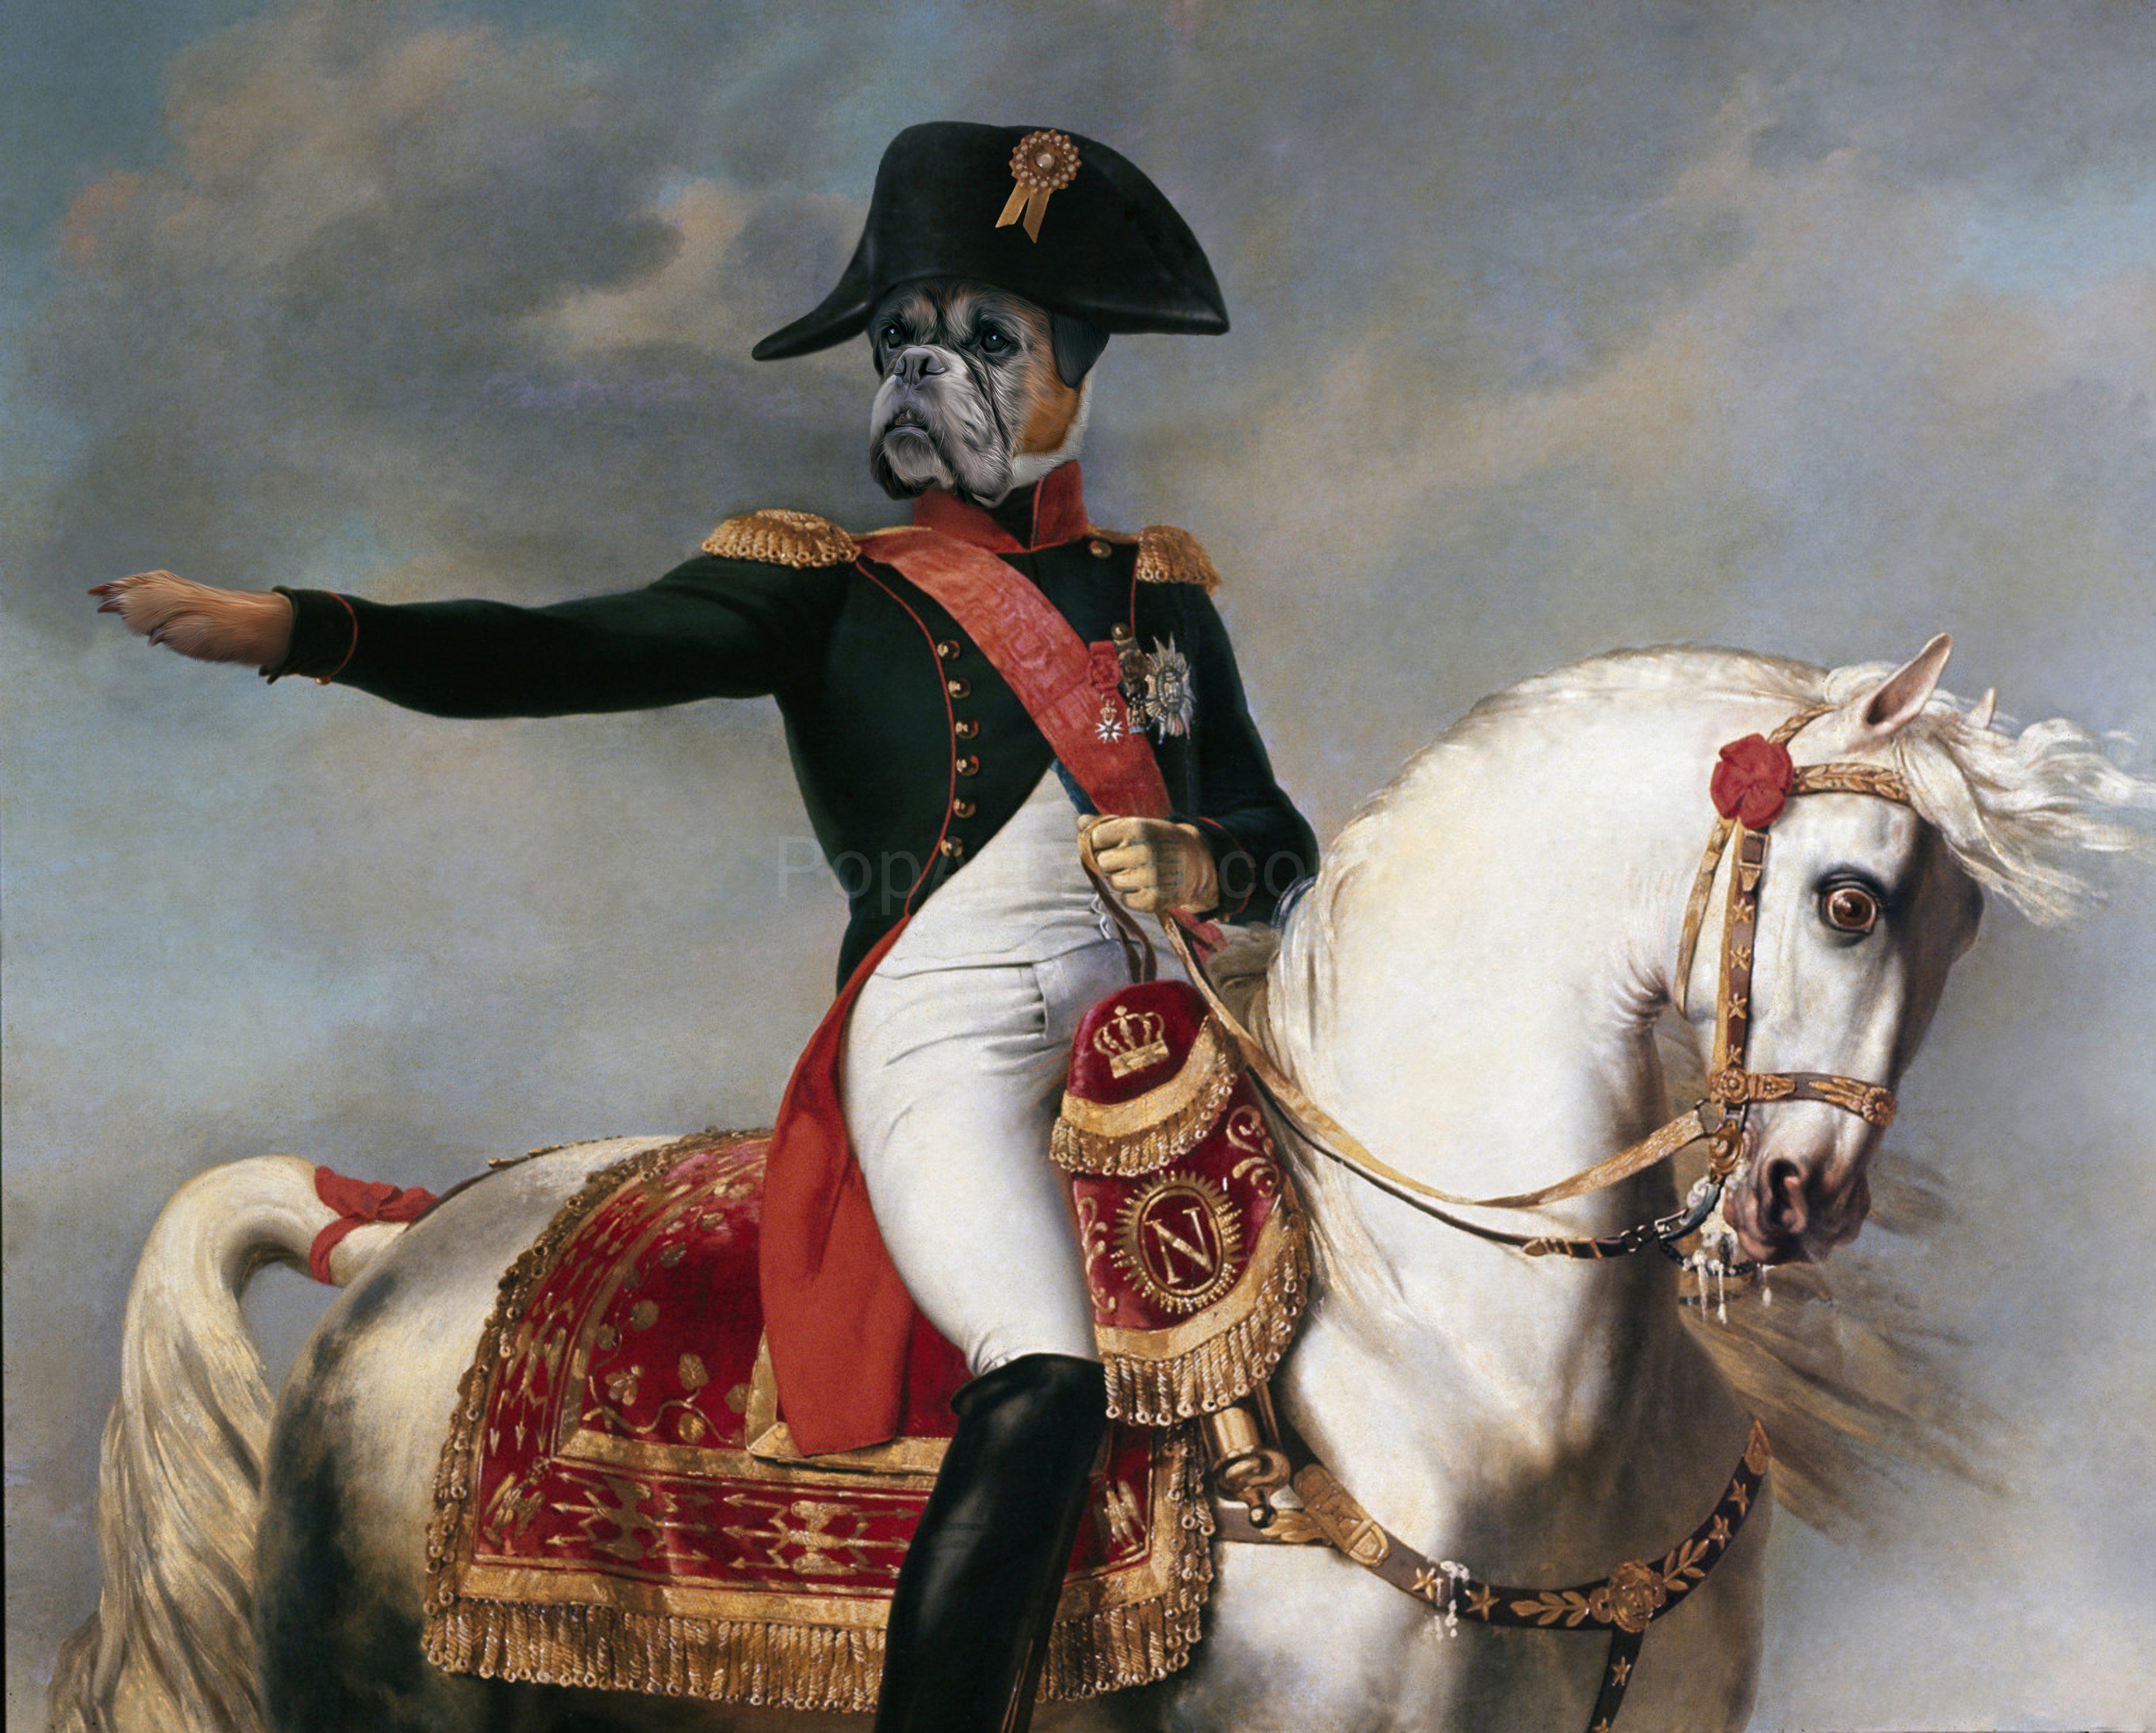 The portrait shows a dog with a human body dressed in a Napoleon costume riding a white horse